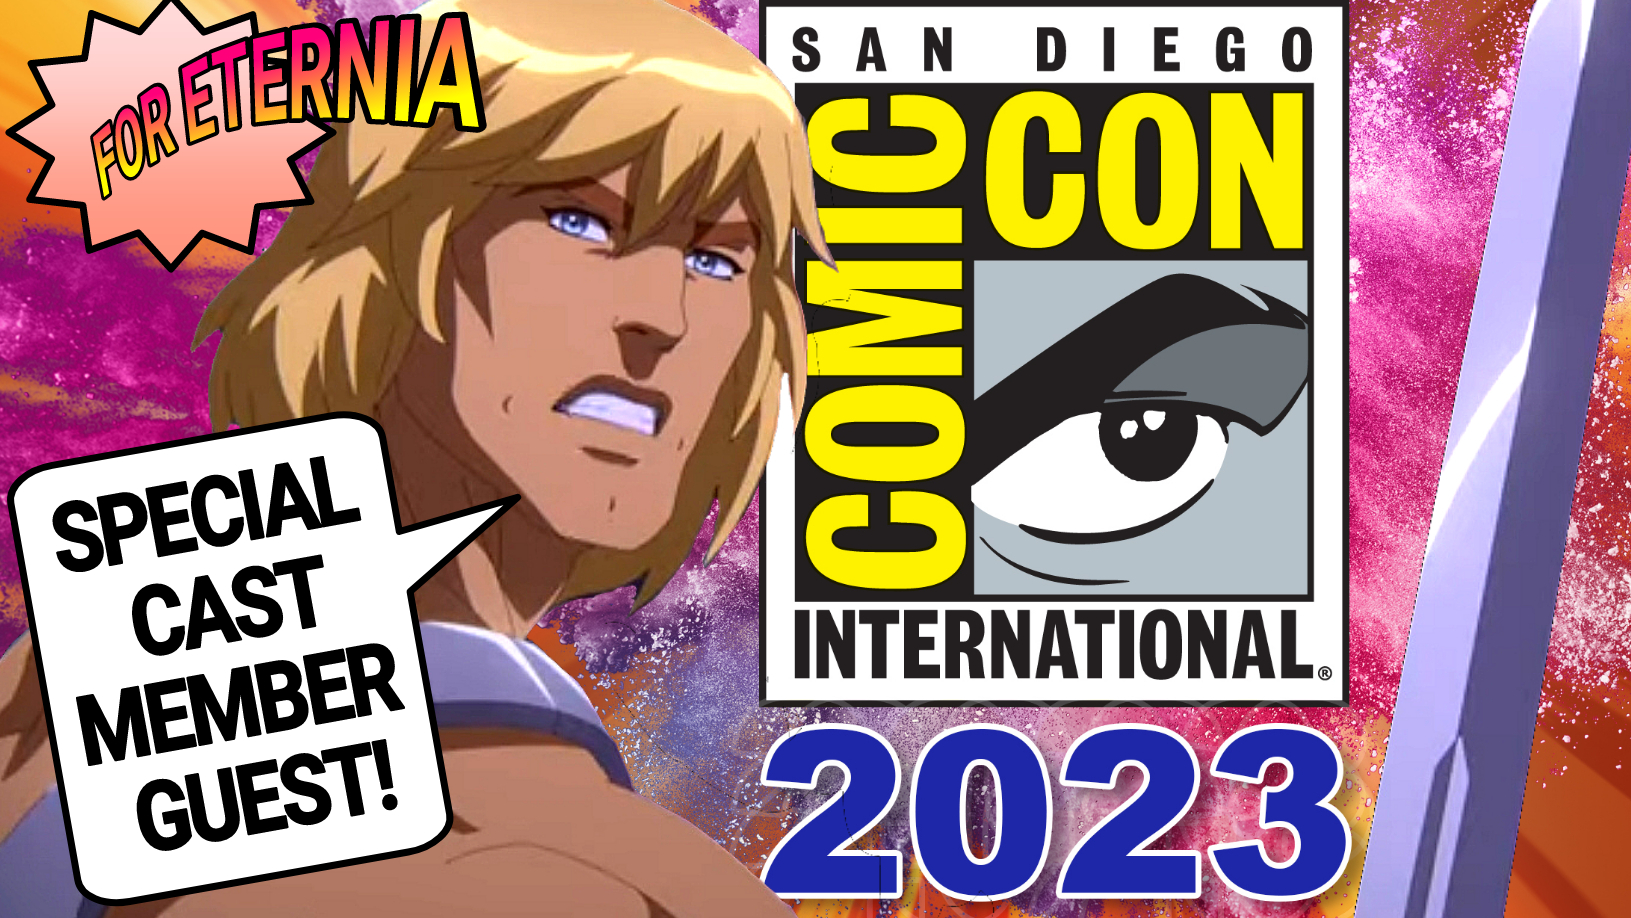 Masters of the Universe: Revolution roundtable discussion announced for SDCC 2023!